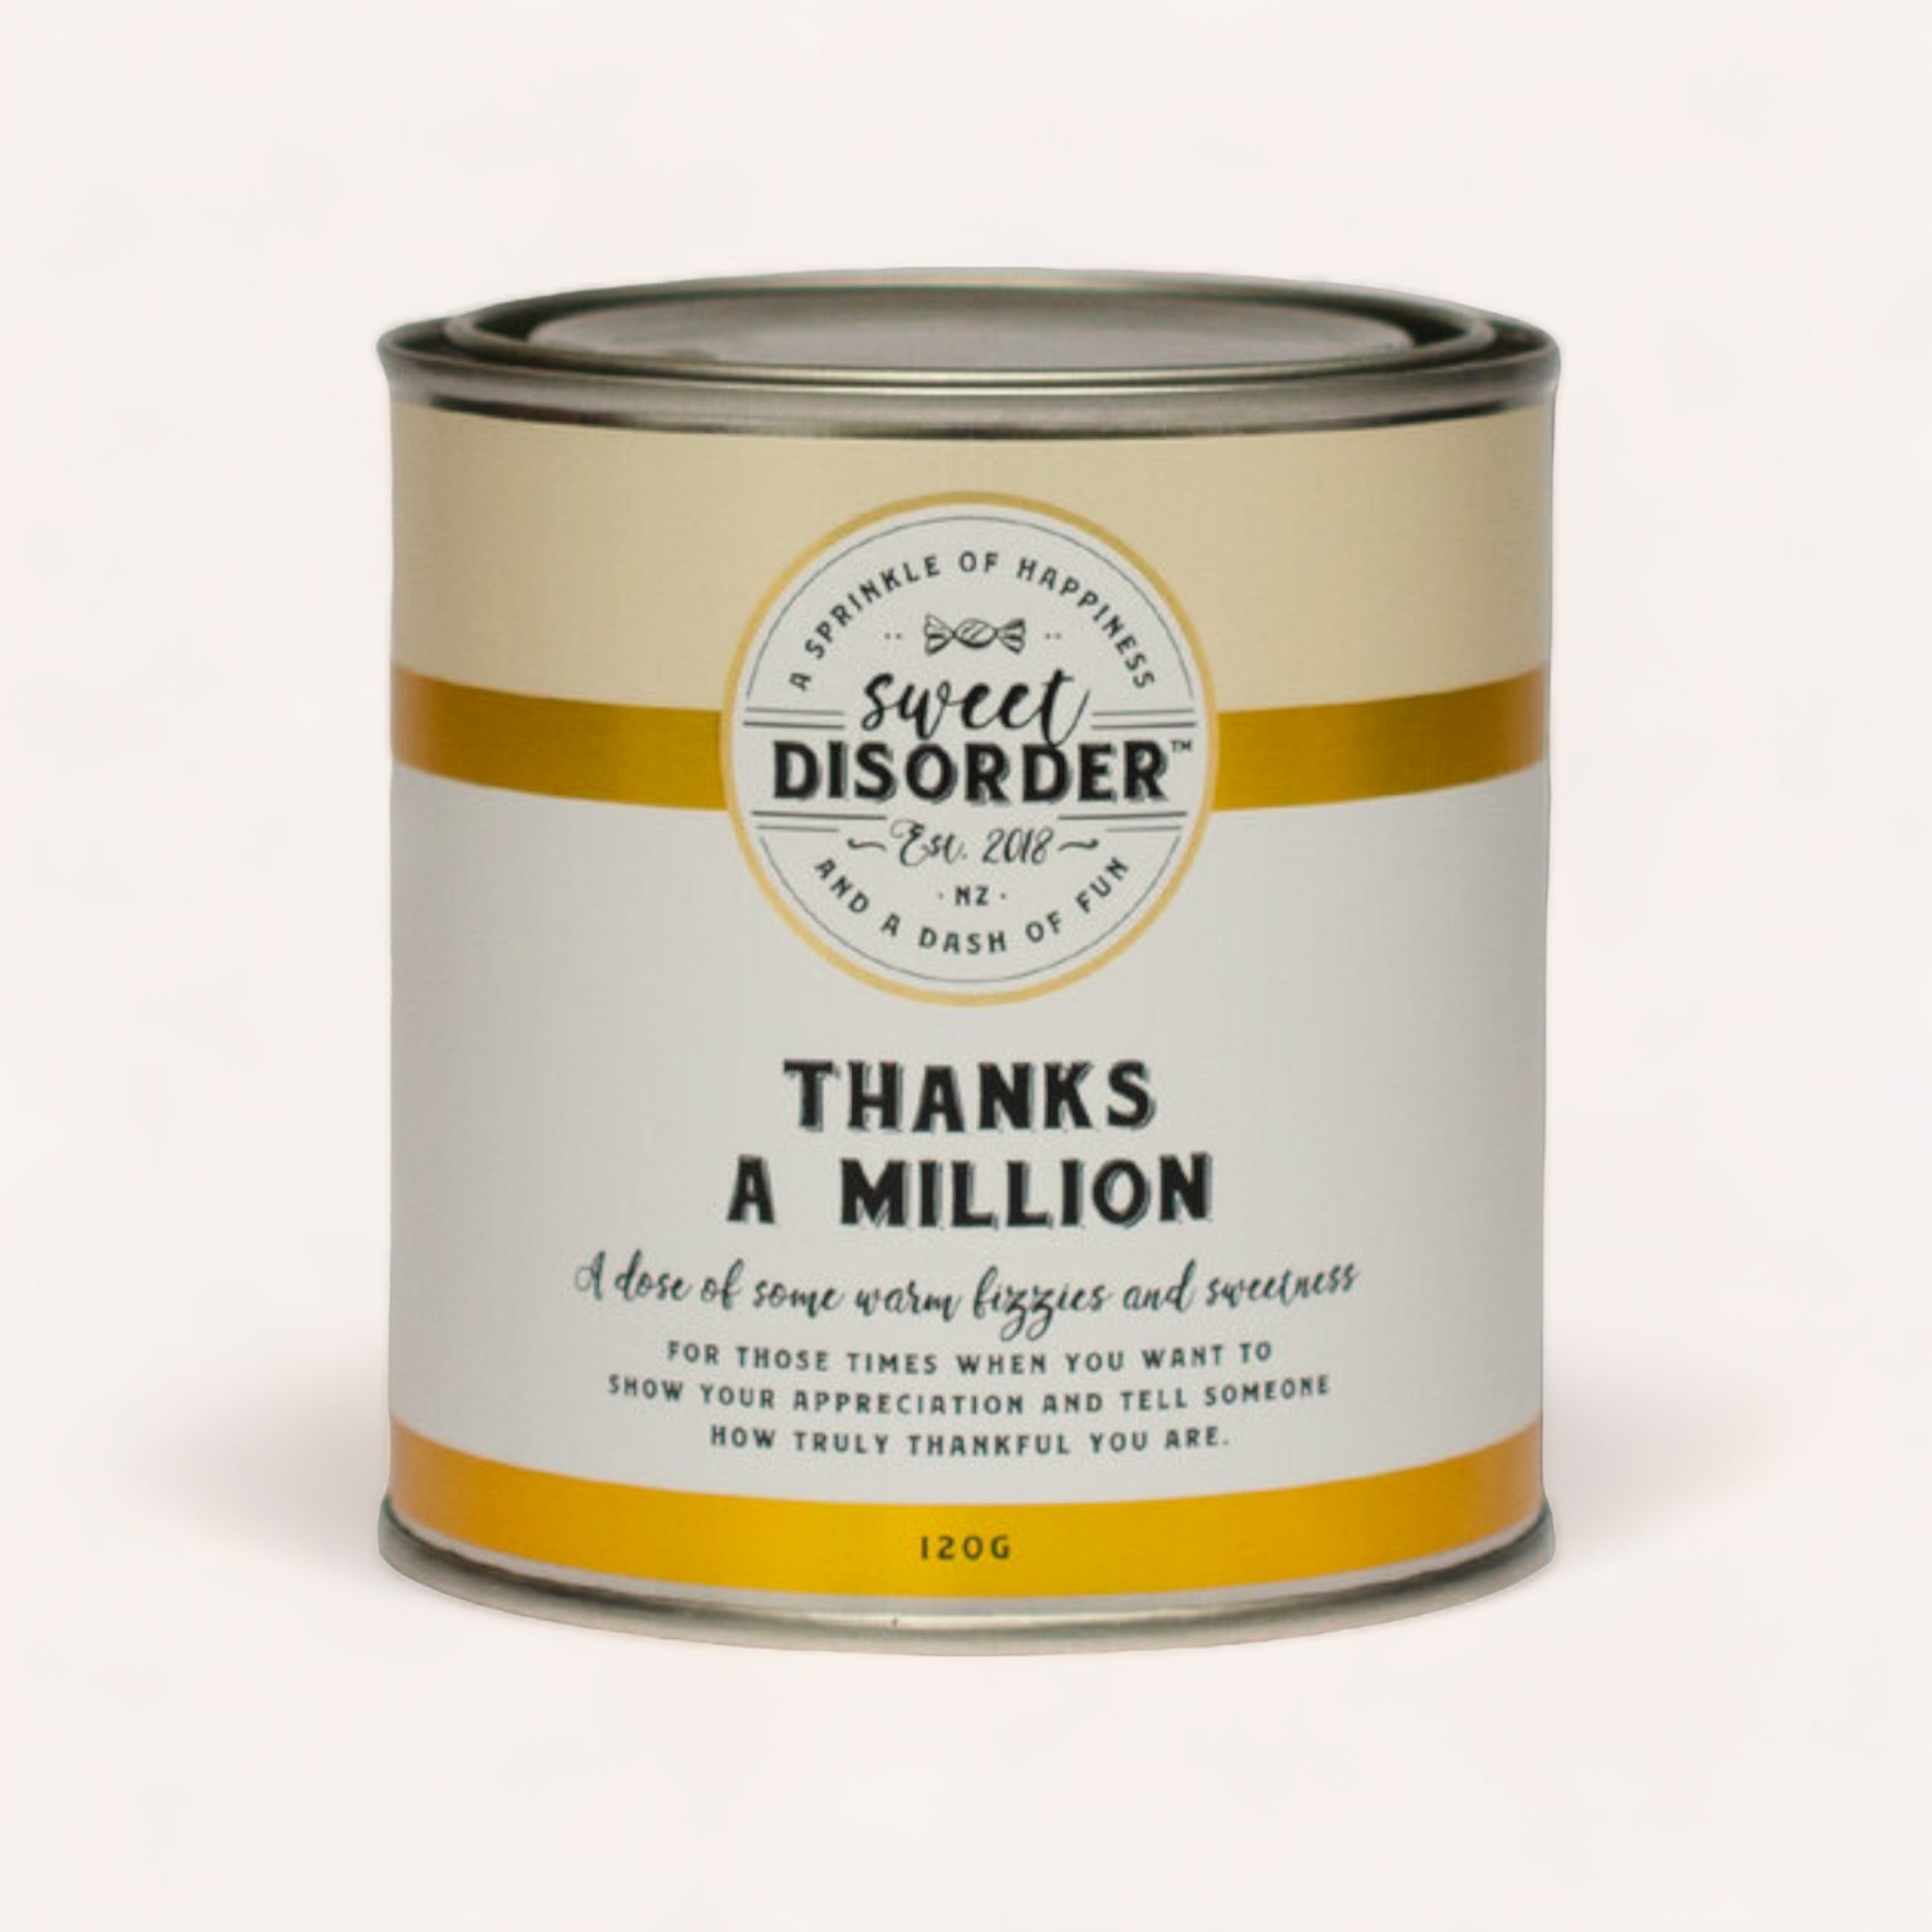 A whimsically designed can labeled "Thanks a Million Chocolates," marketed as a playful remedy with doses of gratitude, giggles, and chocolate coins by Sweet Disorder.